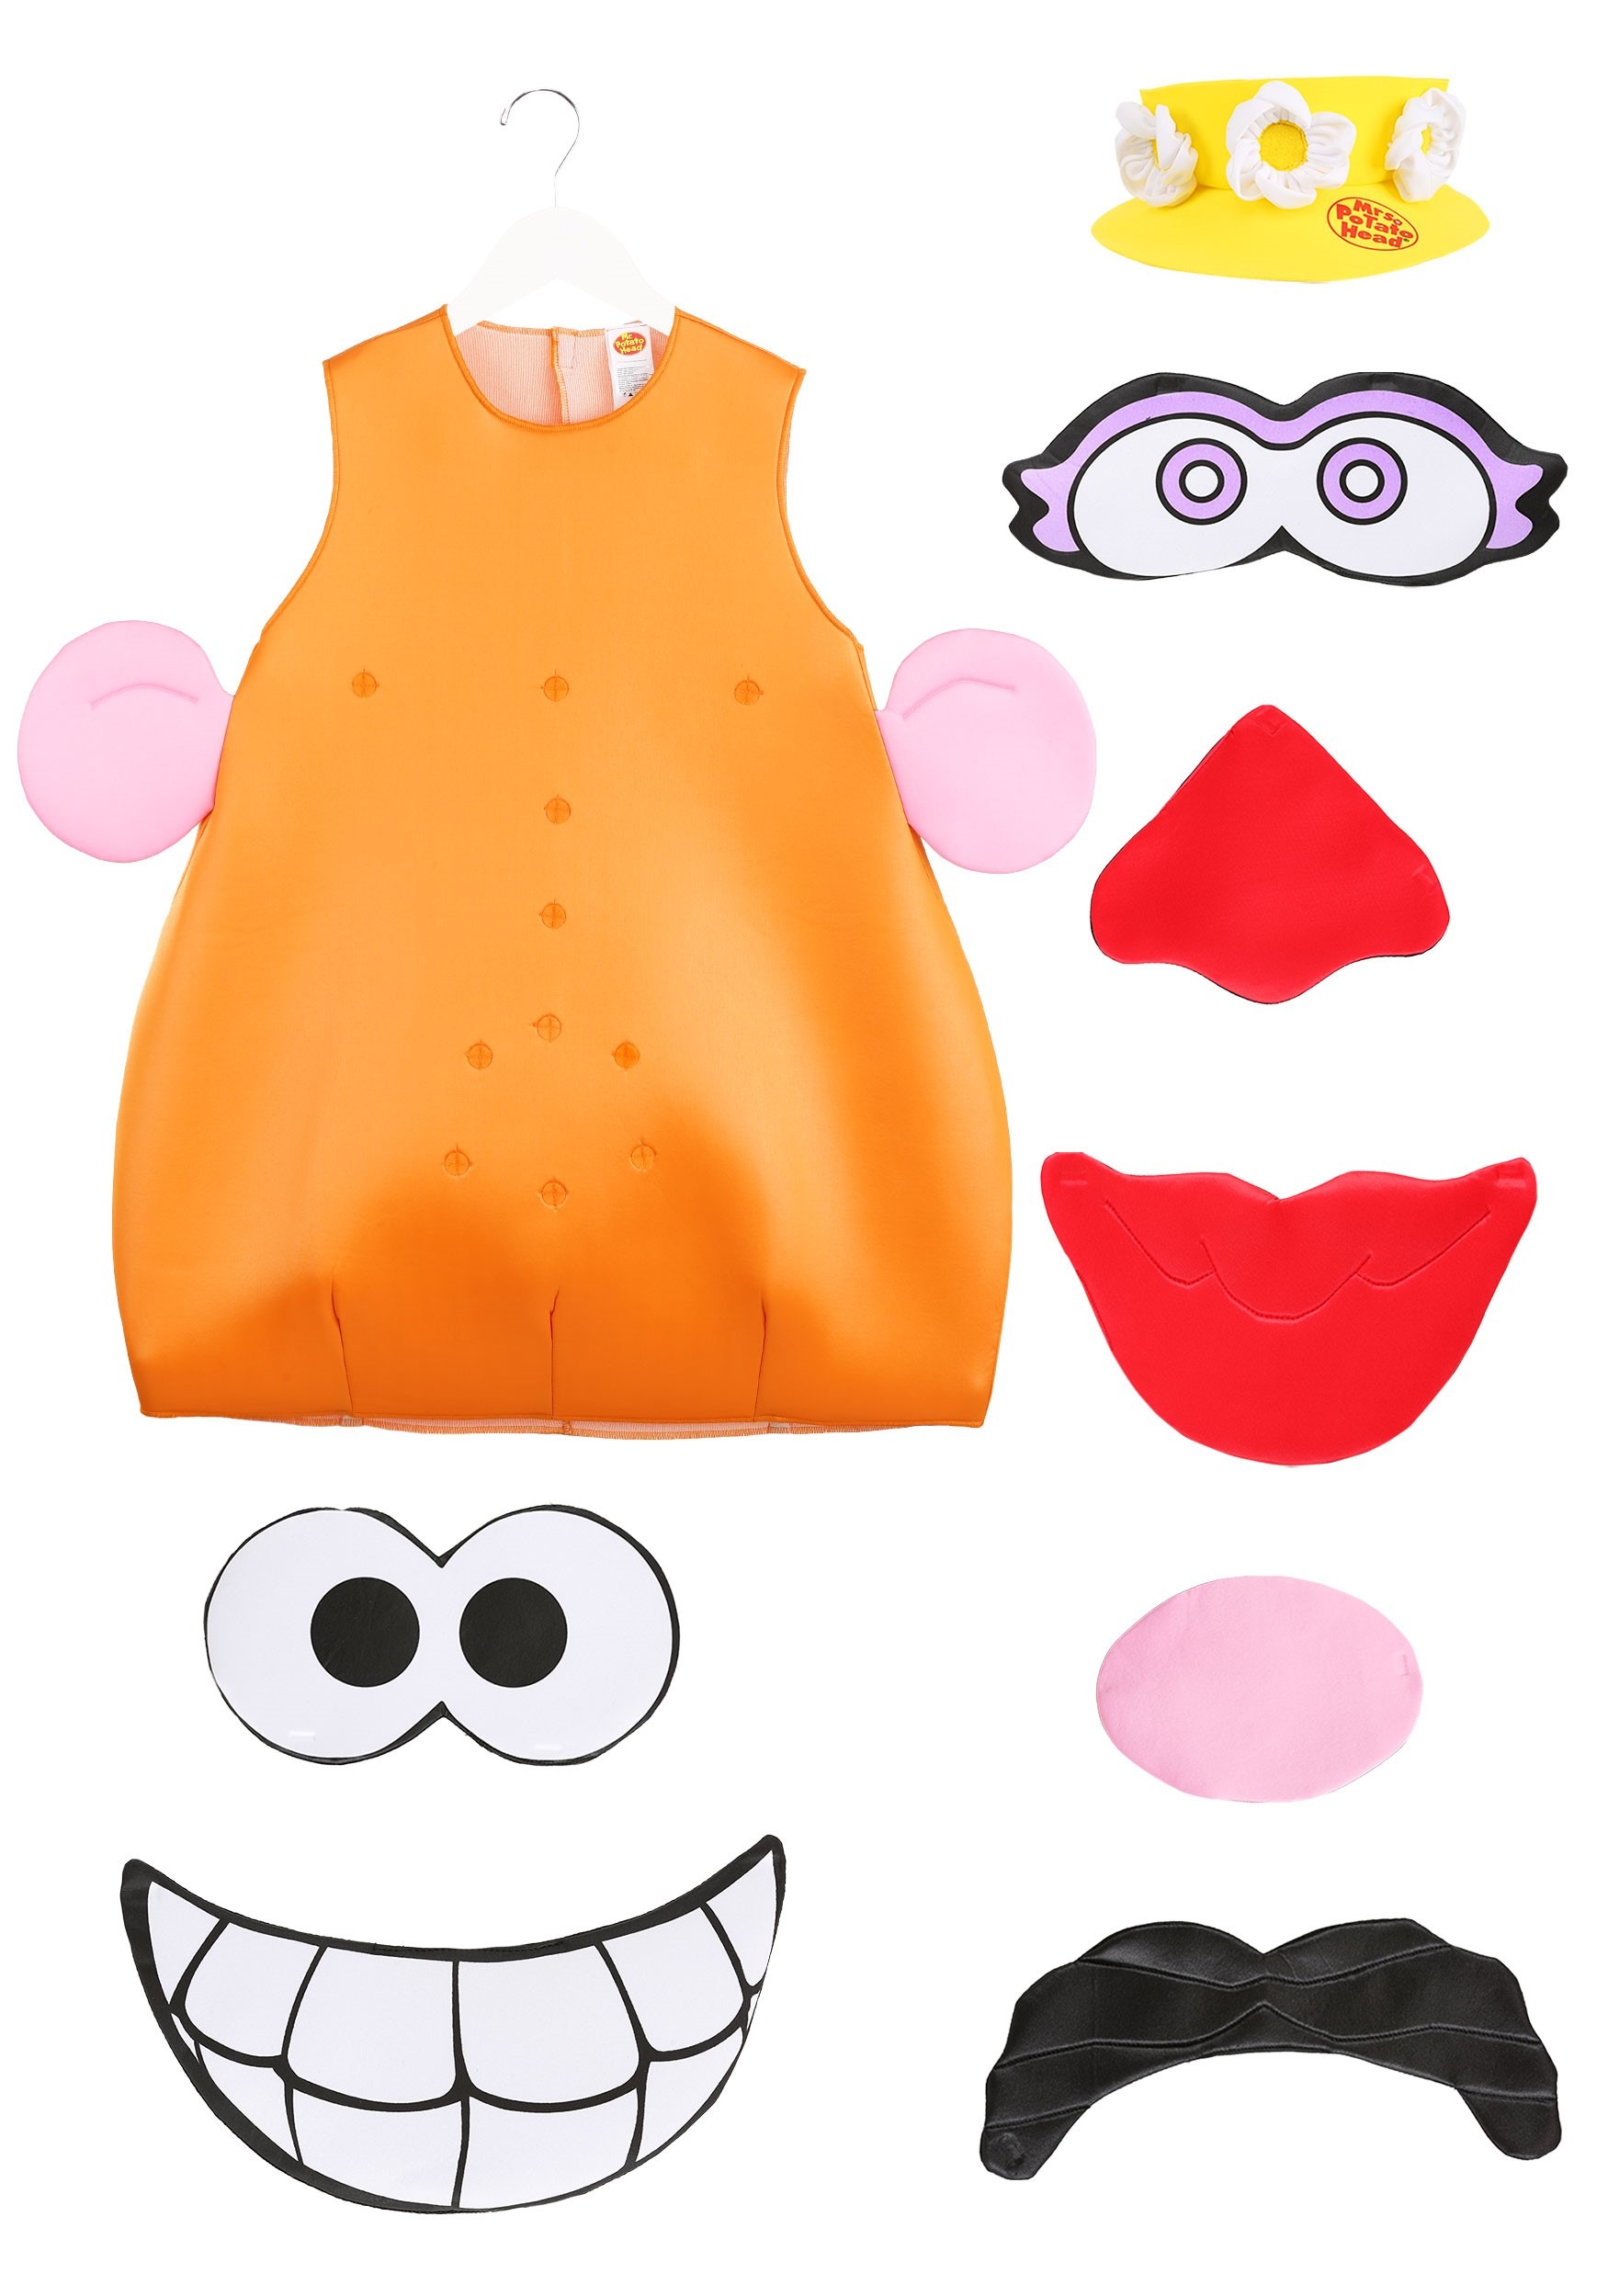 Disguise Mr And Mrs Potato Head Kit